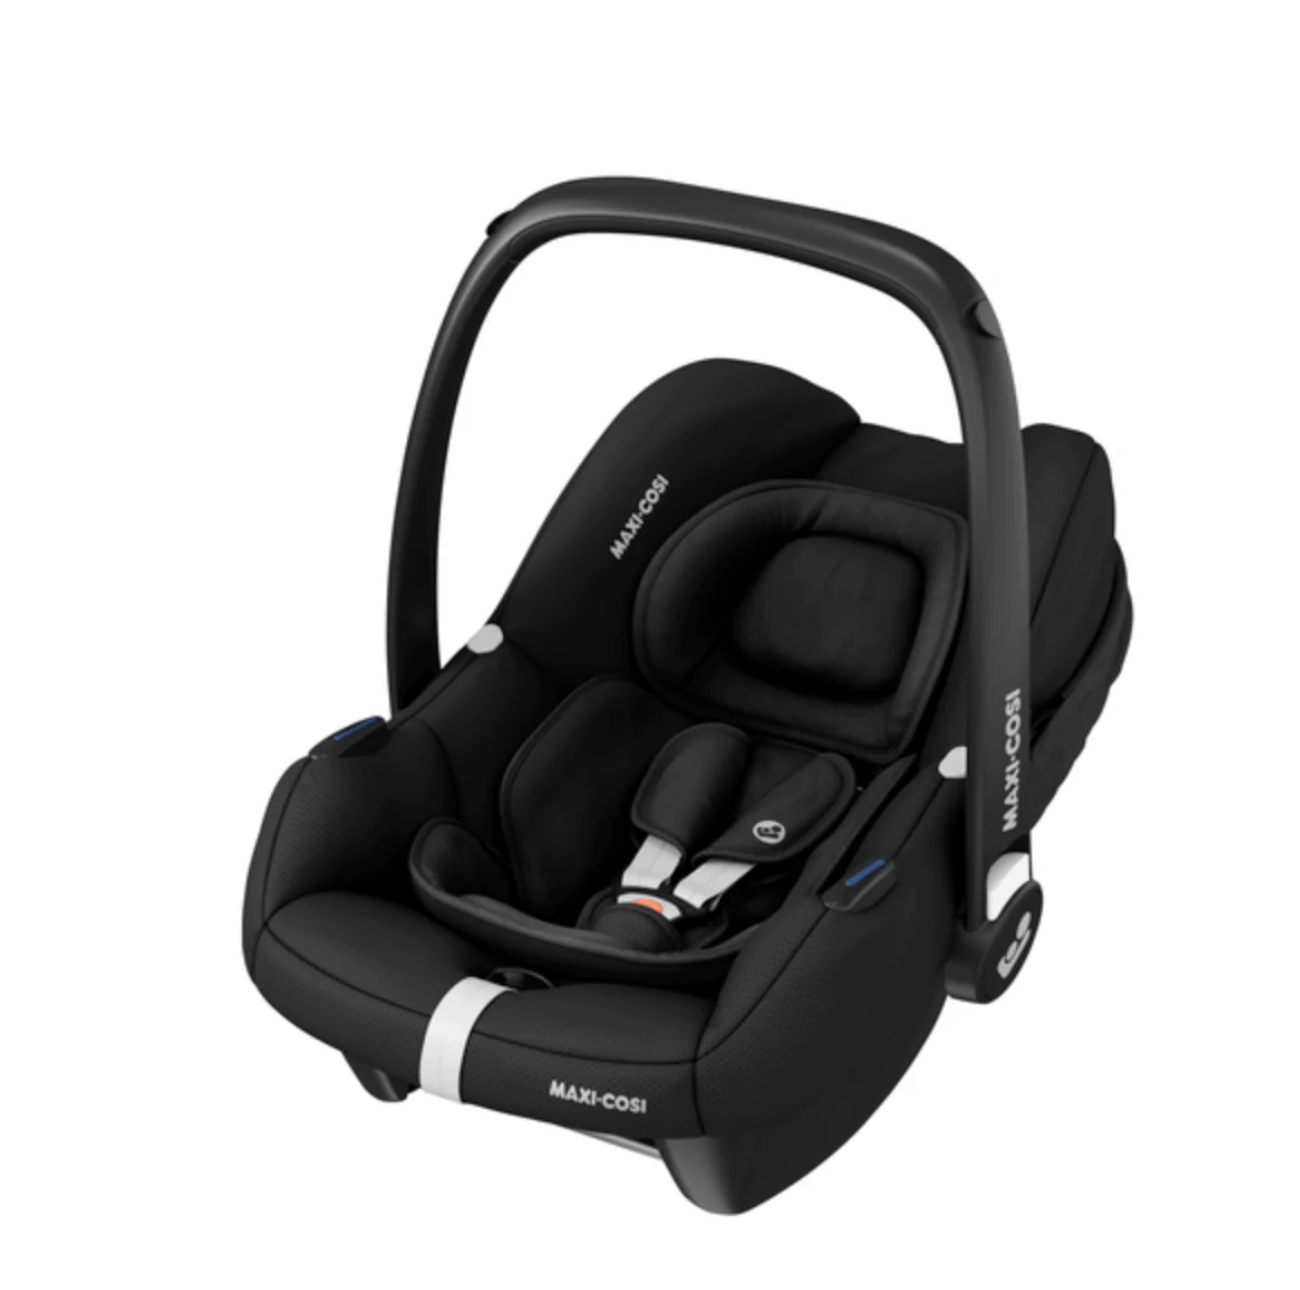 Bugaboo Donkey 5 Duo Pushchair & Carrycot with Maxi-Cosi Cabriofix i-Size Travel System- Black & Desert Taupe